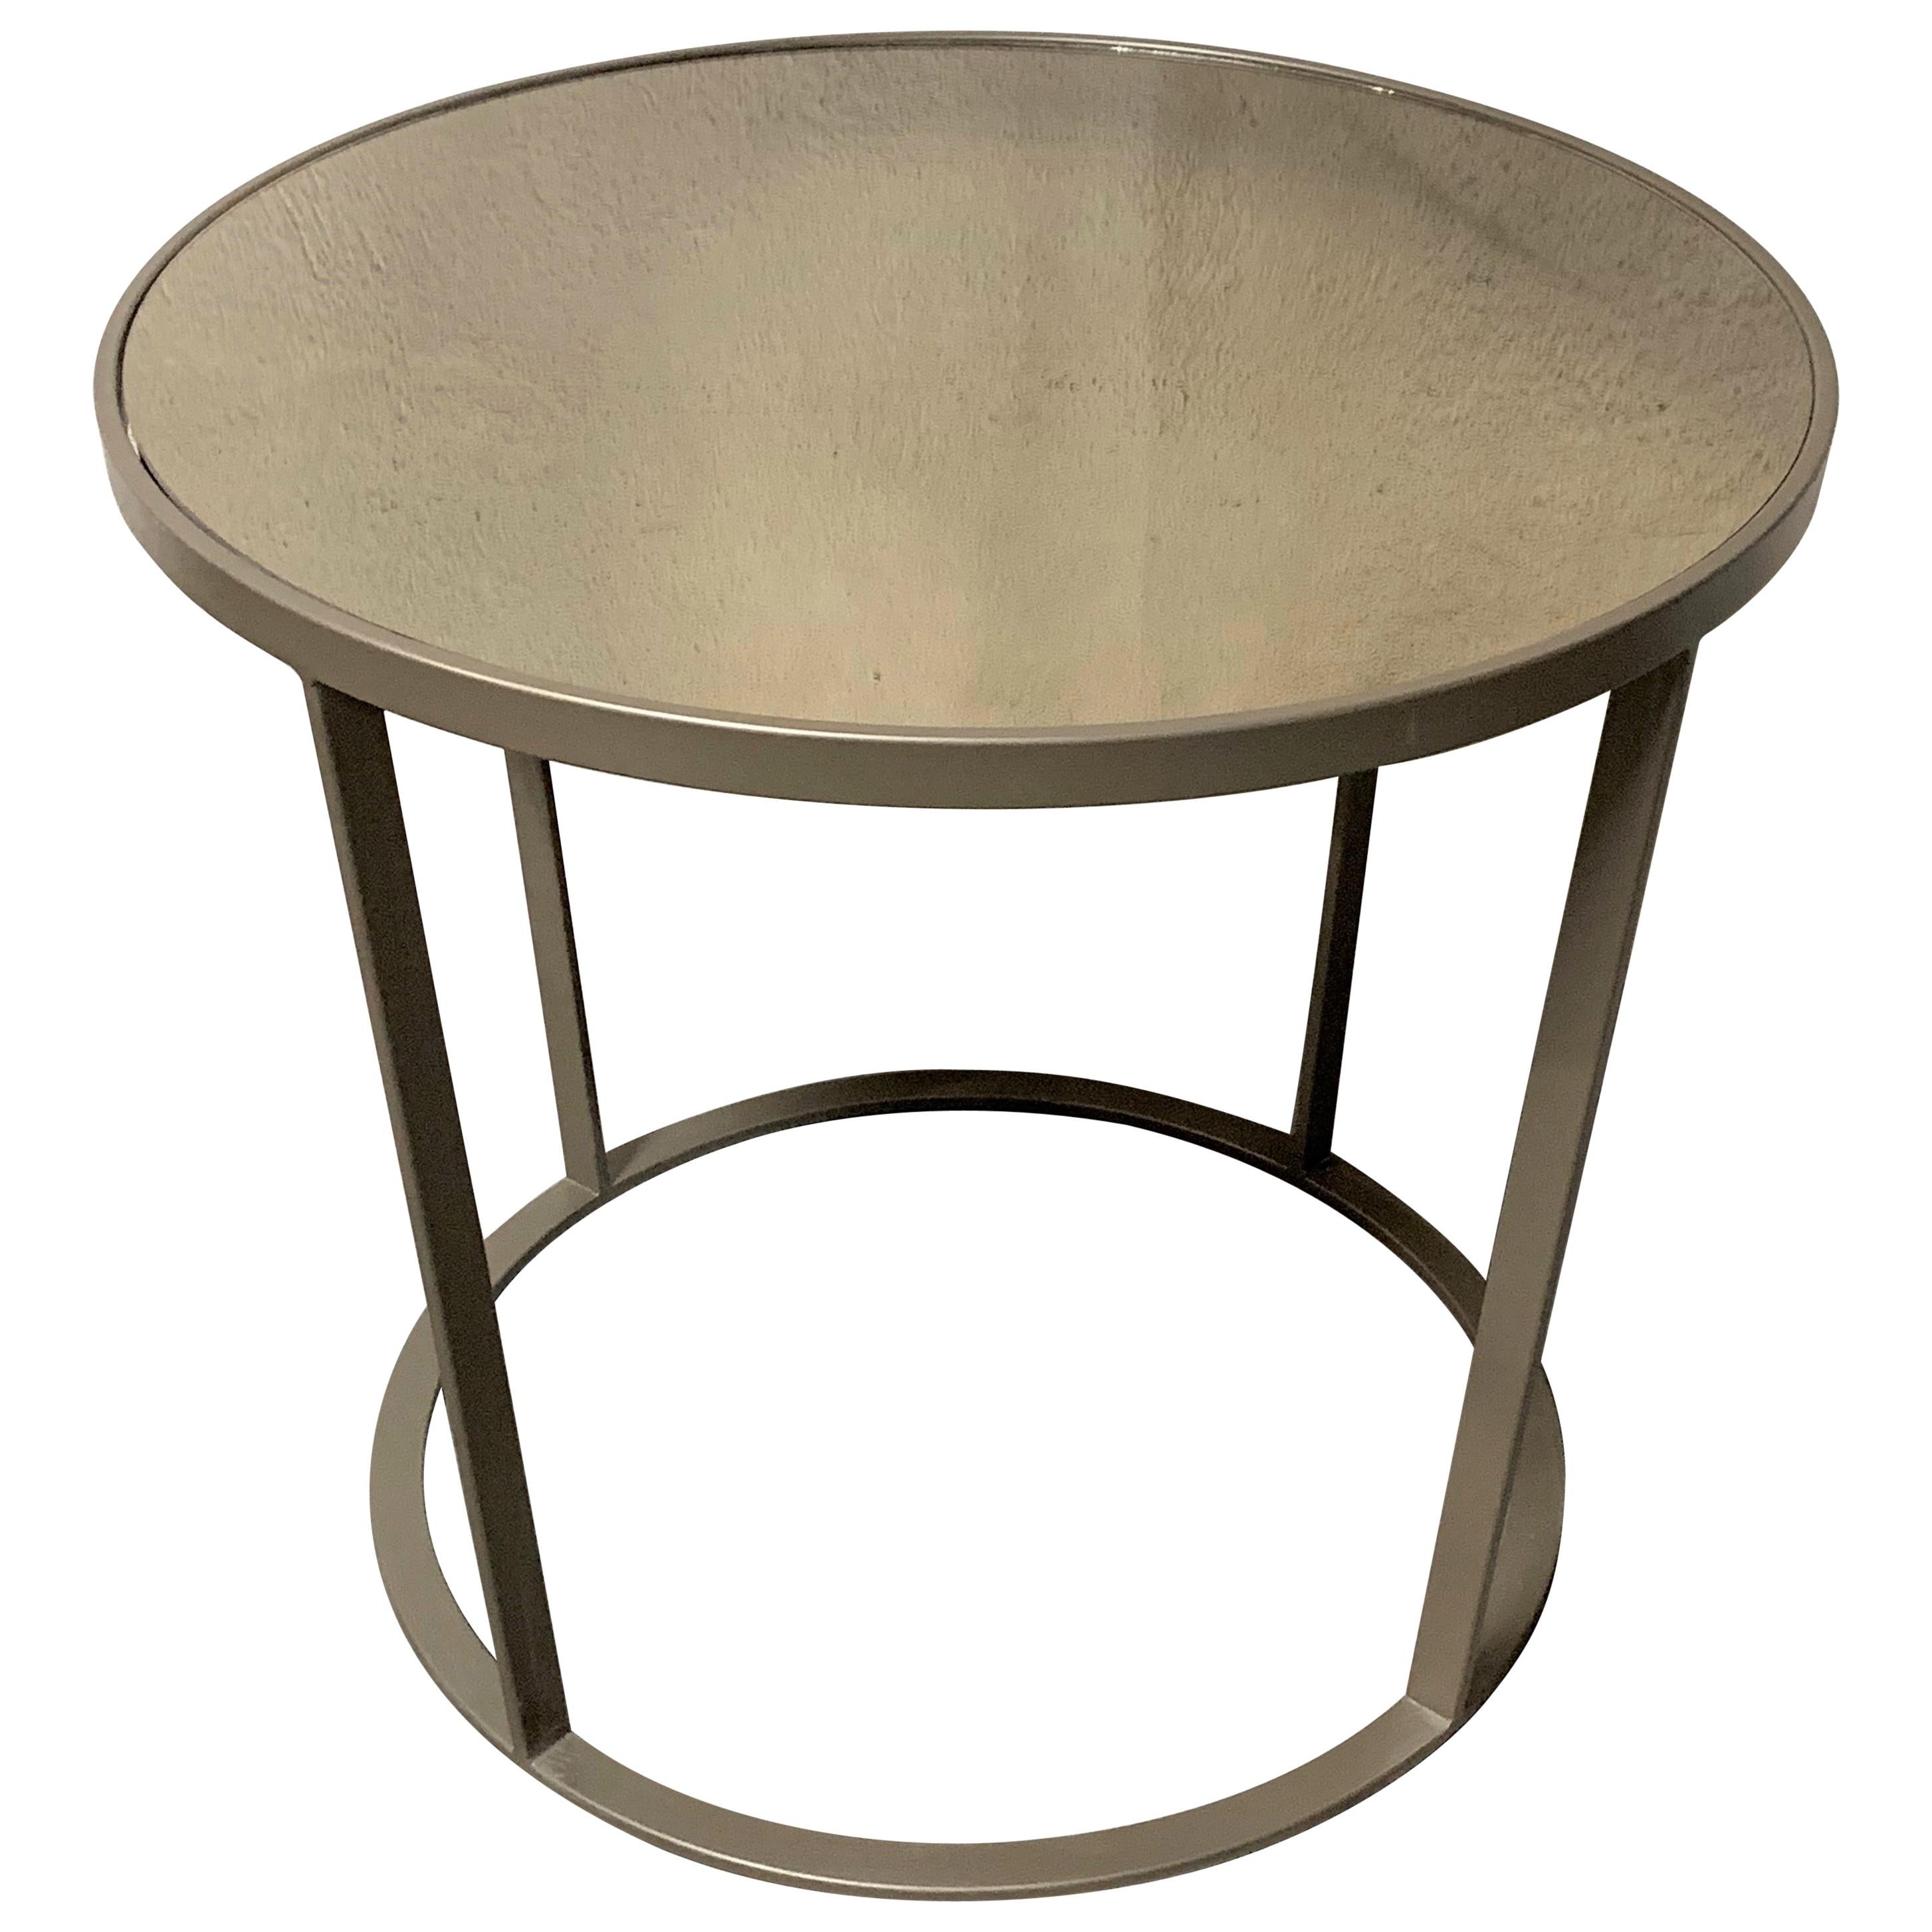 New Coffee or Side Table in Champagne Color with Smoked Mirrored Glass Top